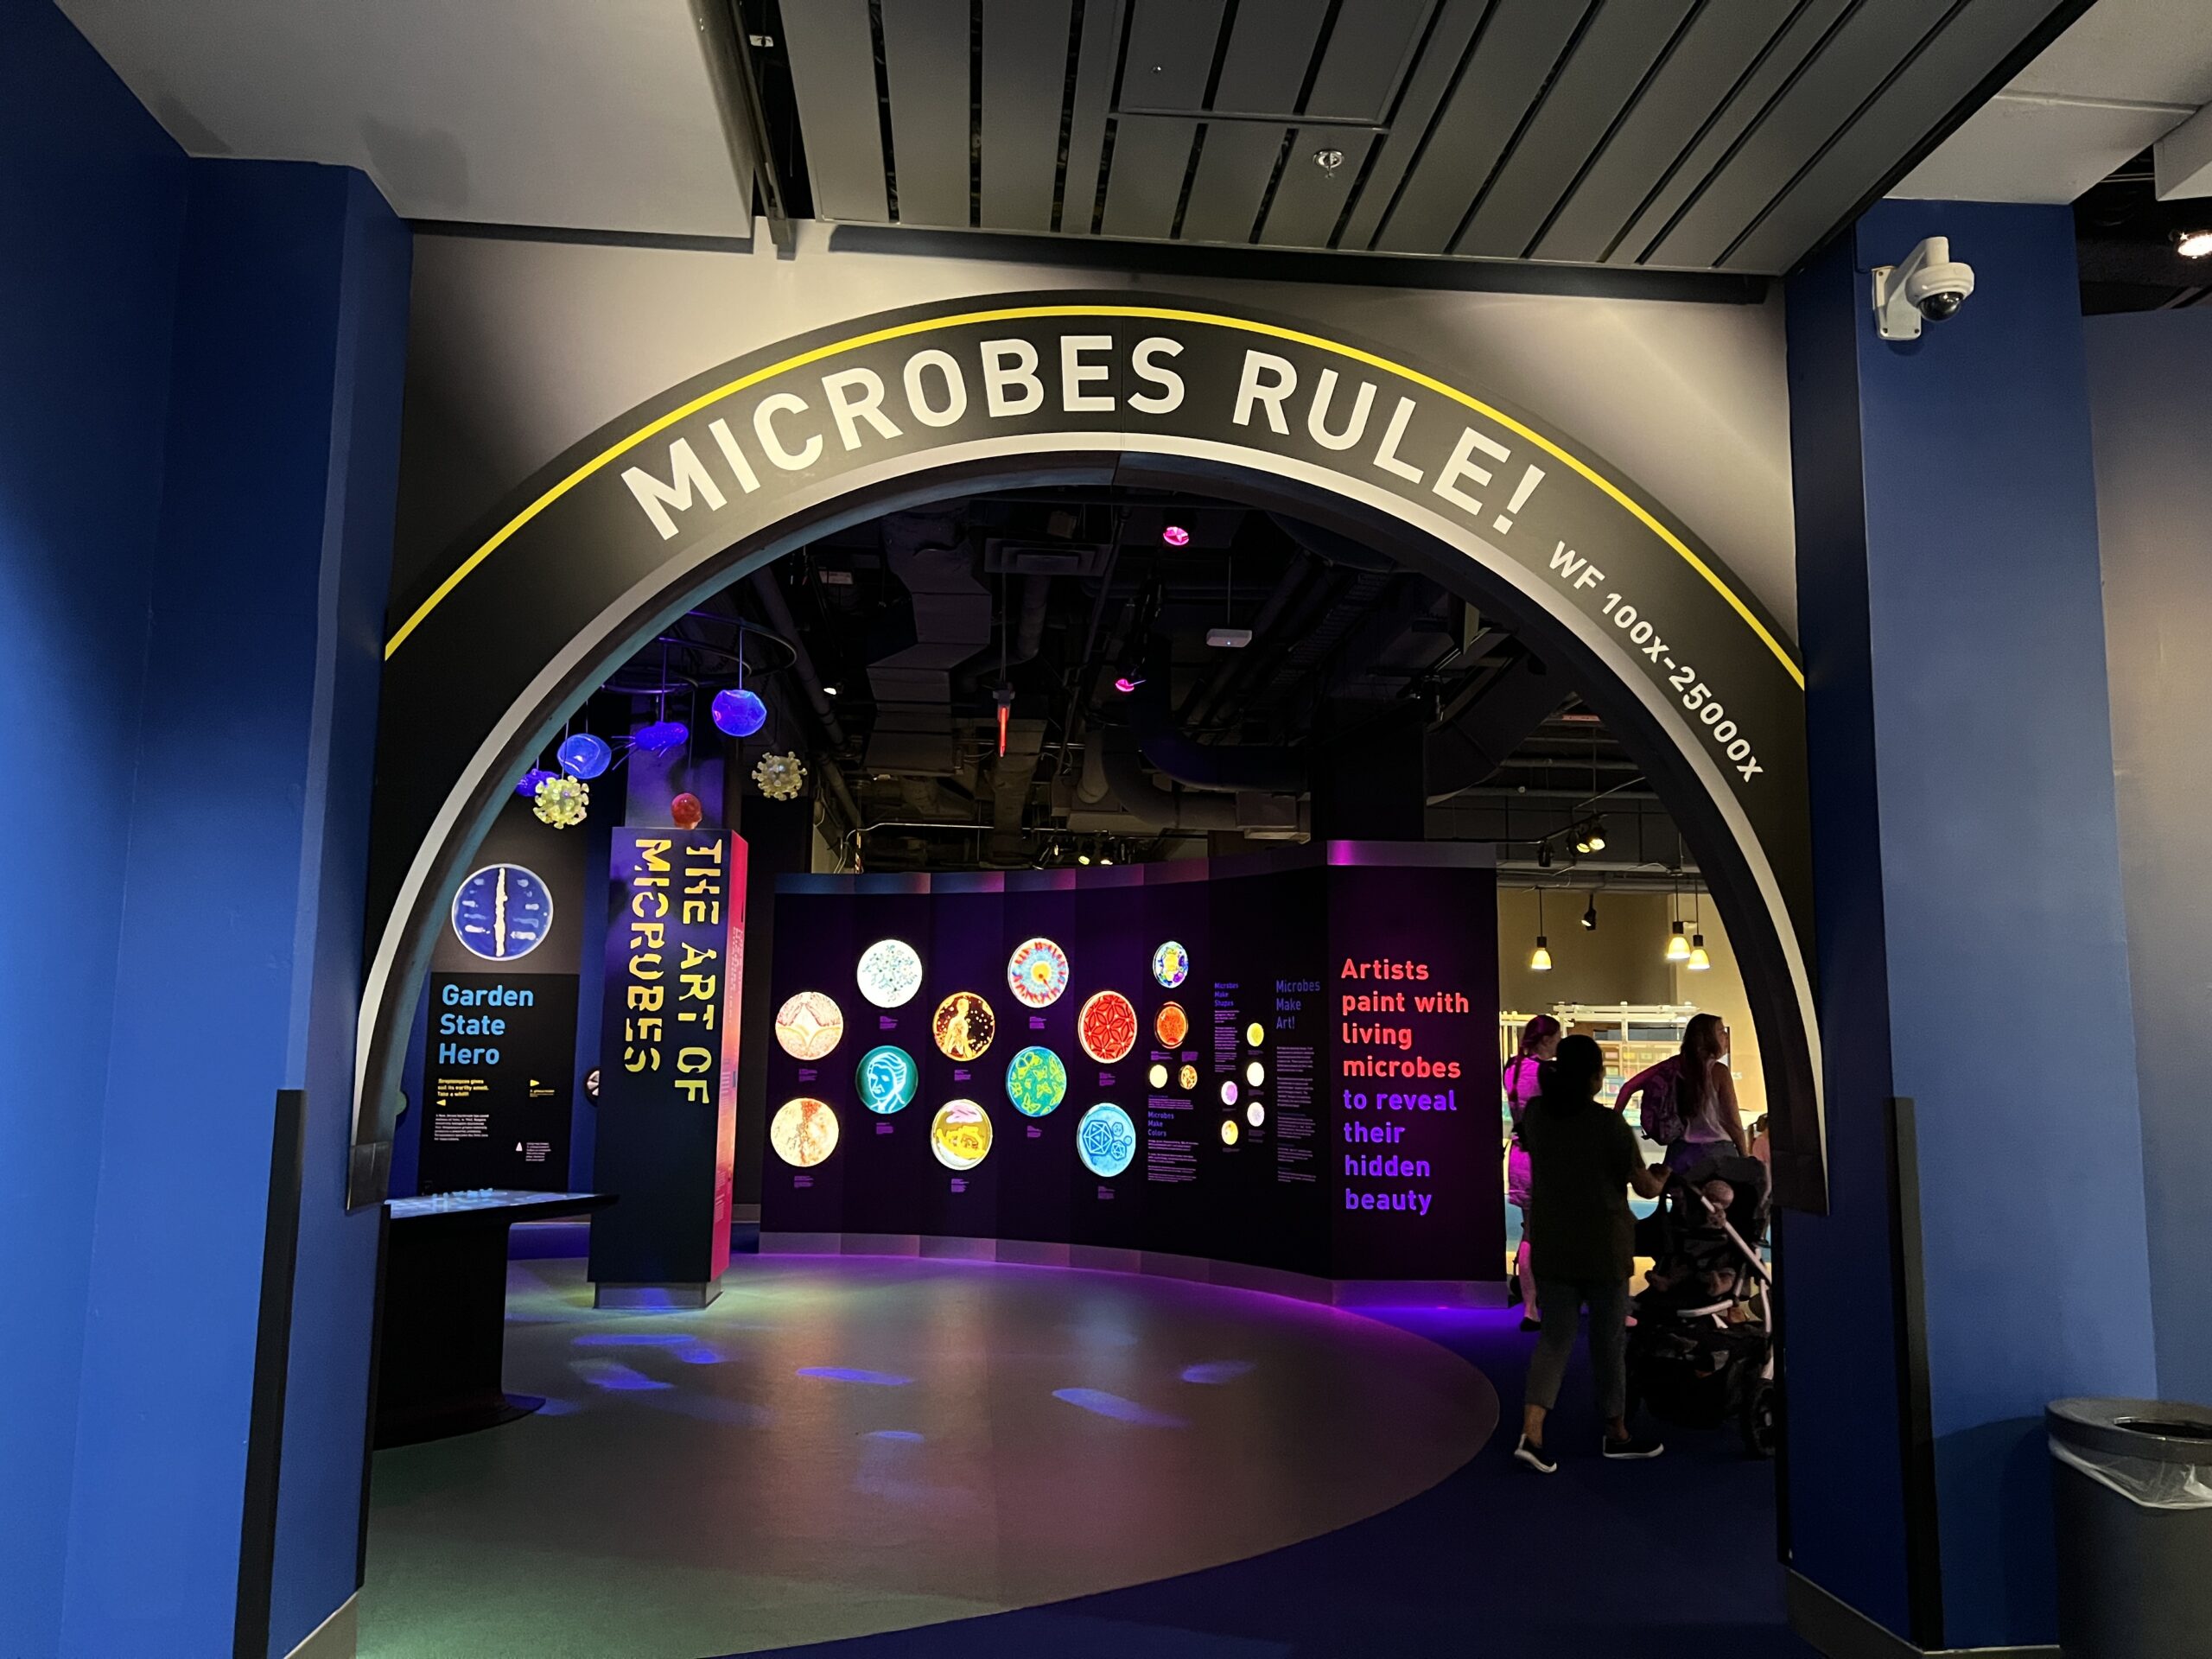 Microbes Rule entrance to exhibit at the Liberty Science Center in Jersey City NJ